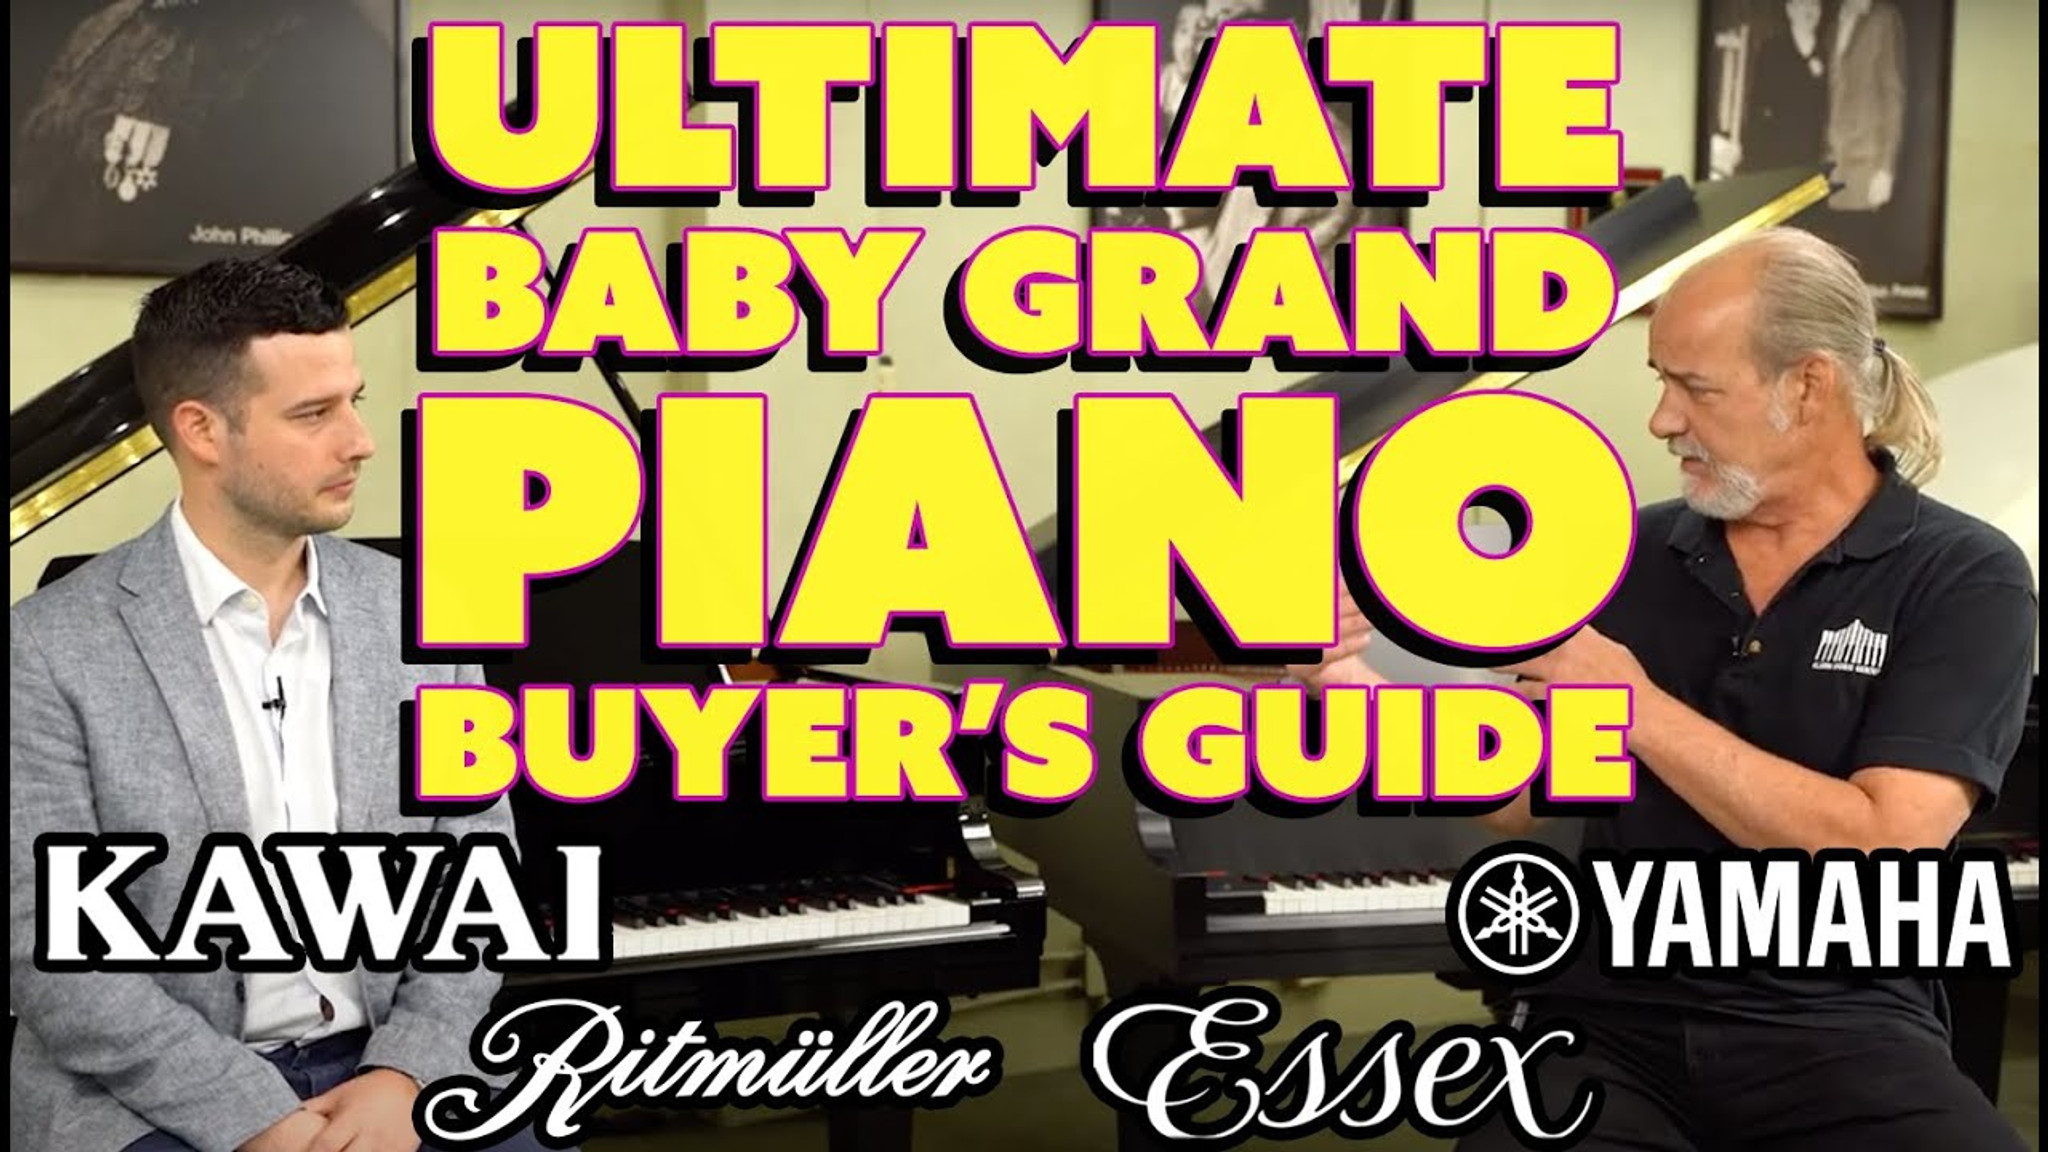 ultimate-baby-grand-piano-buyer-s-guide-kawai-piano-gallery-of-st-louis